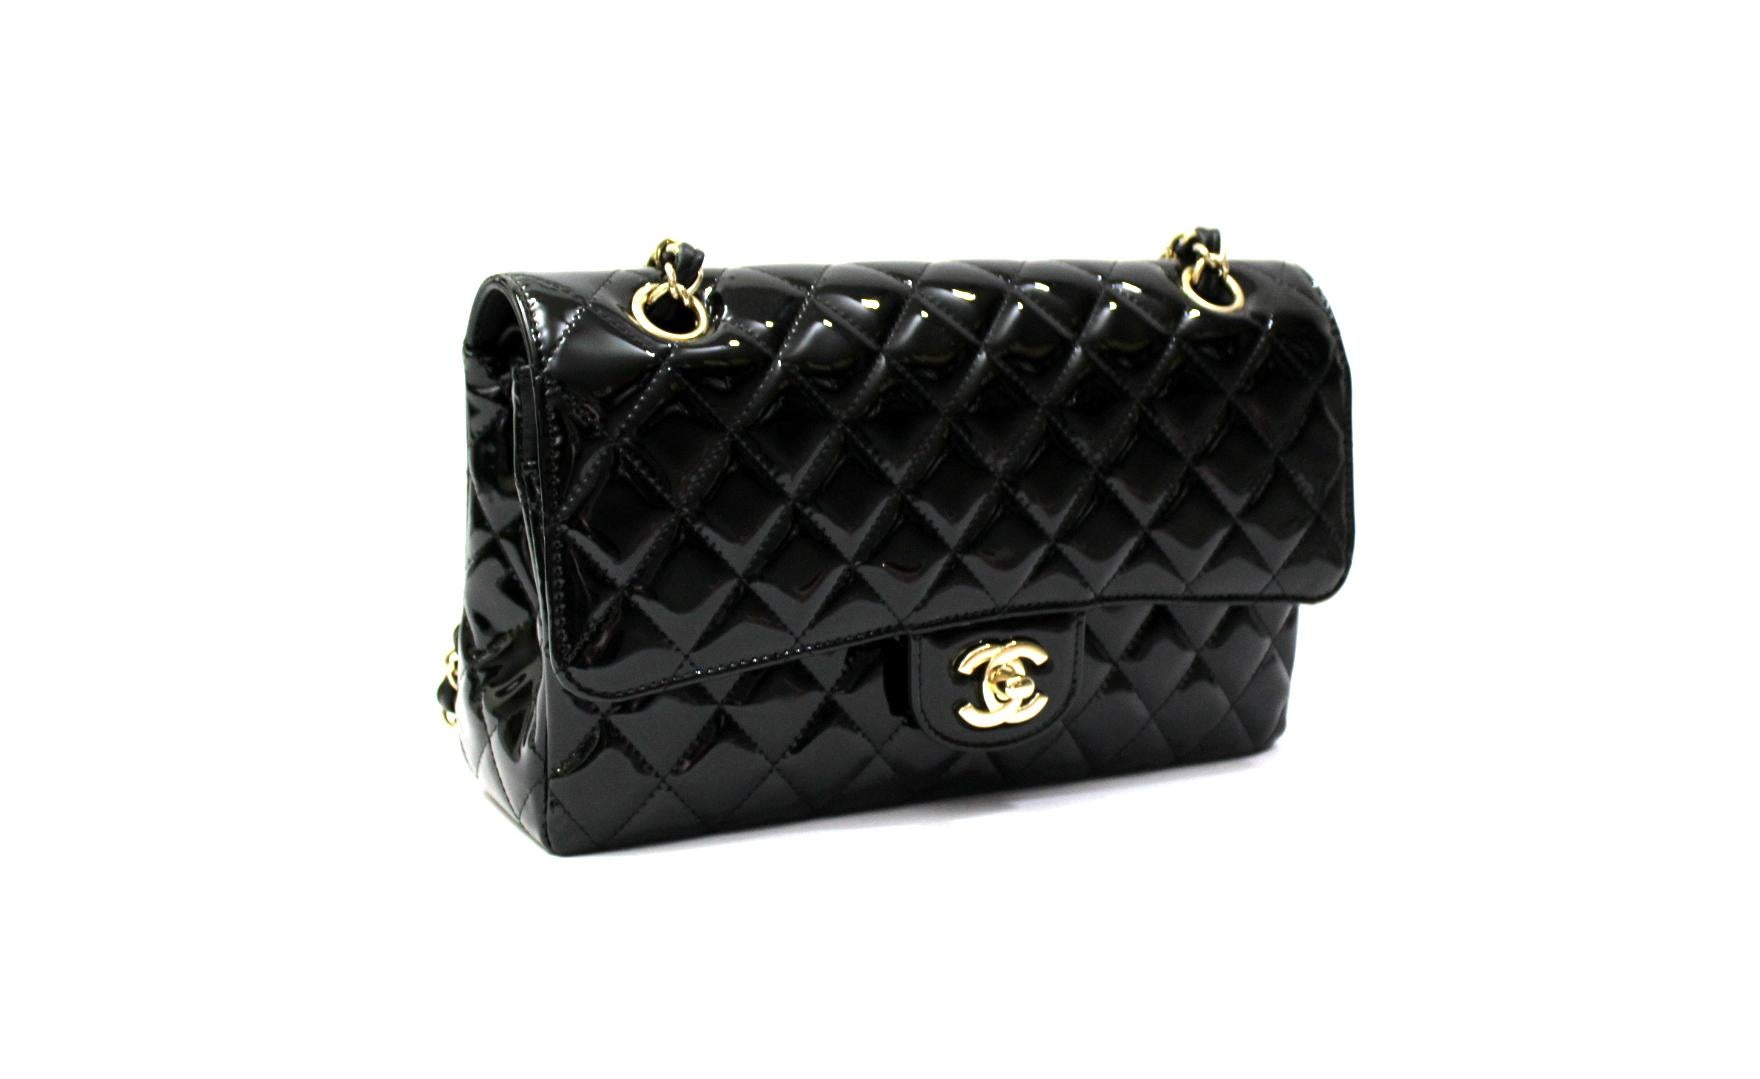 Chanel model 2.55 double-flap bag made of black patent leather with gold hardware.
Double CC closure, inside in quite roomy leather.
Equipped with leather shoulder strap and sliding chain.
The bag is in excellent condition, year 2019 with card.